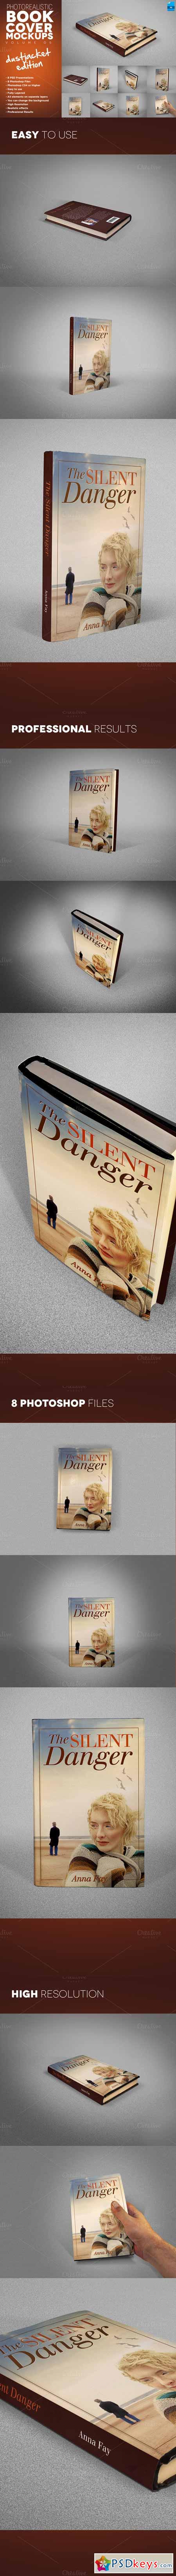 Book Cover Mockup Dustjacket Edition 317870